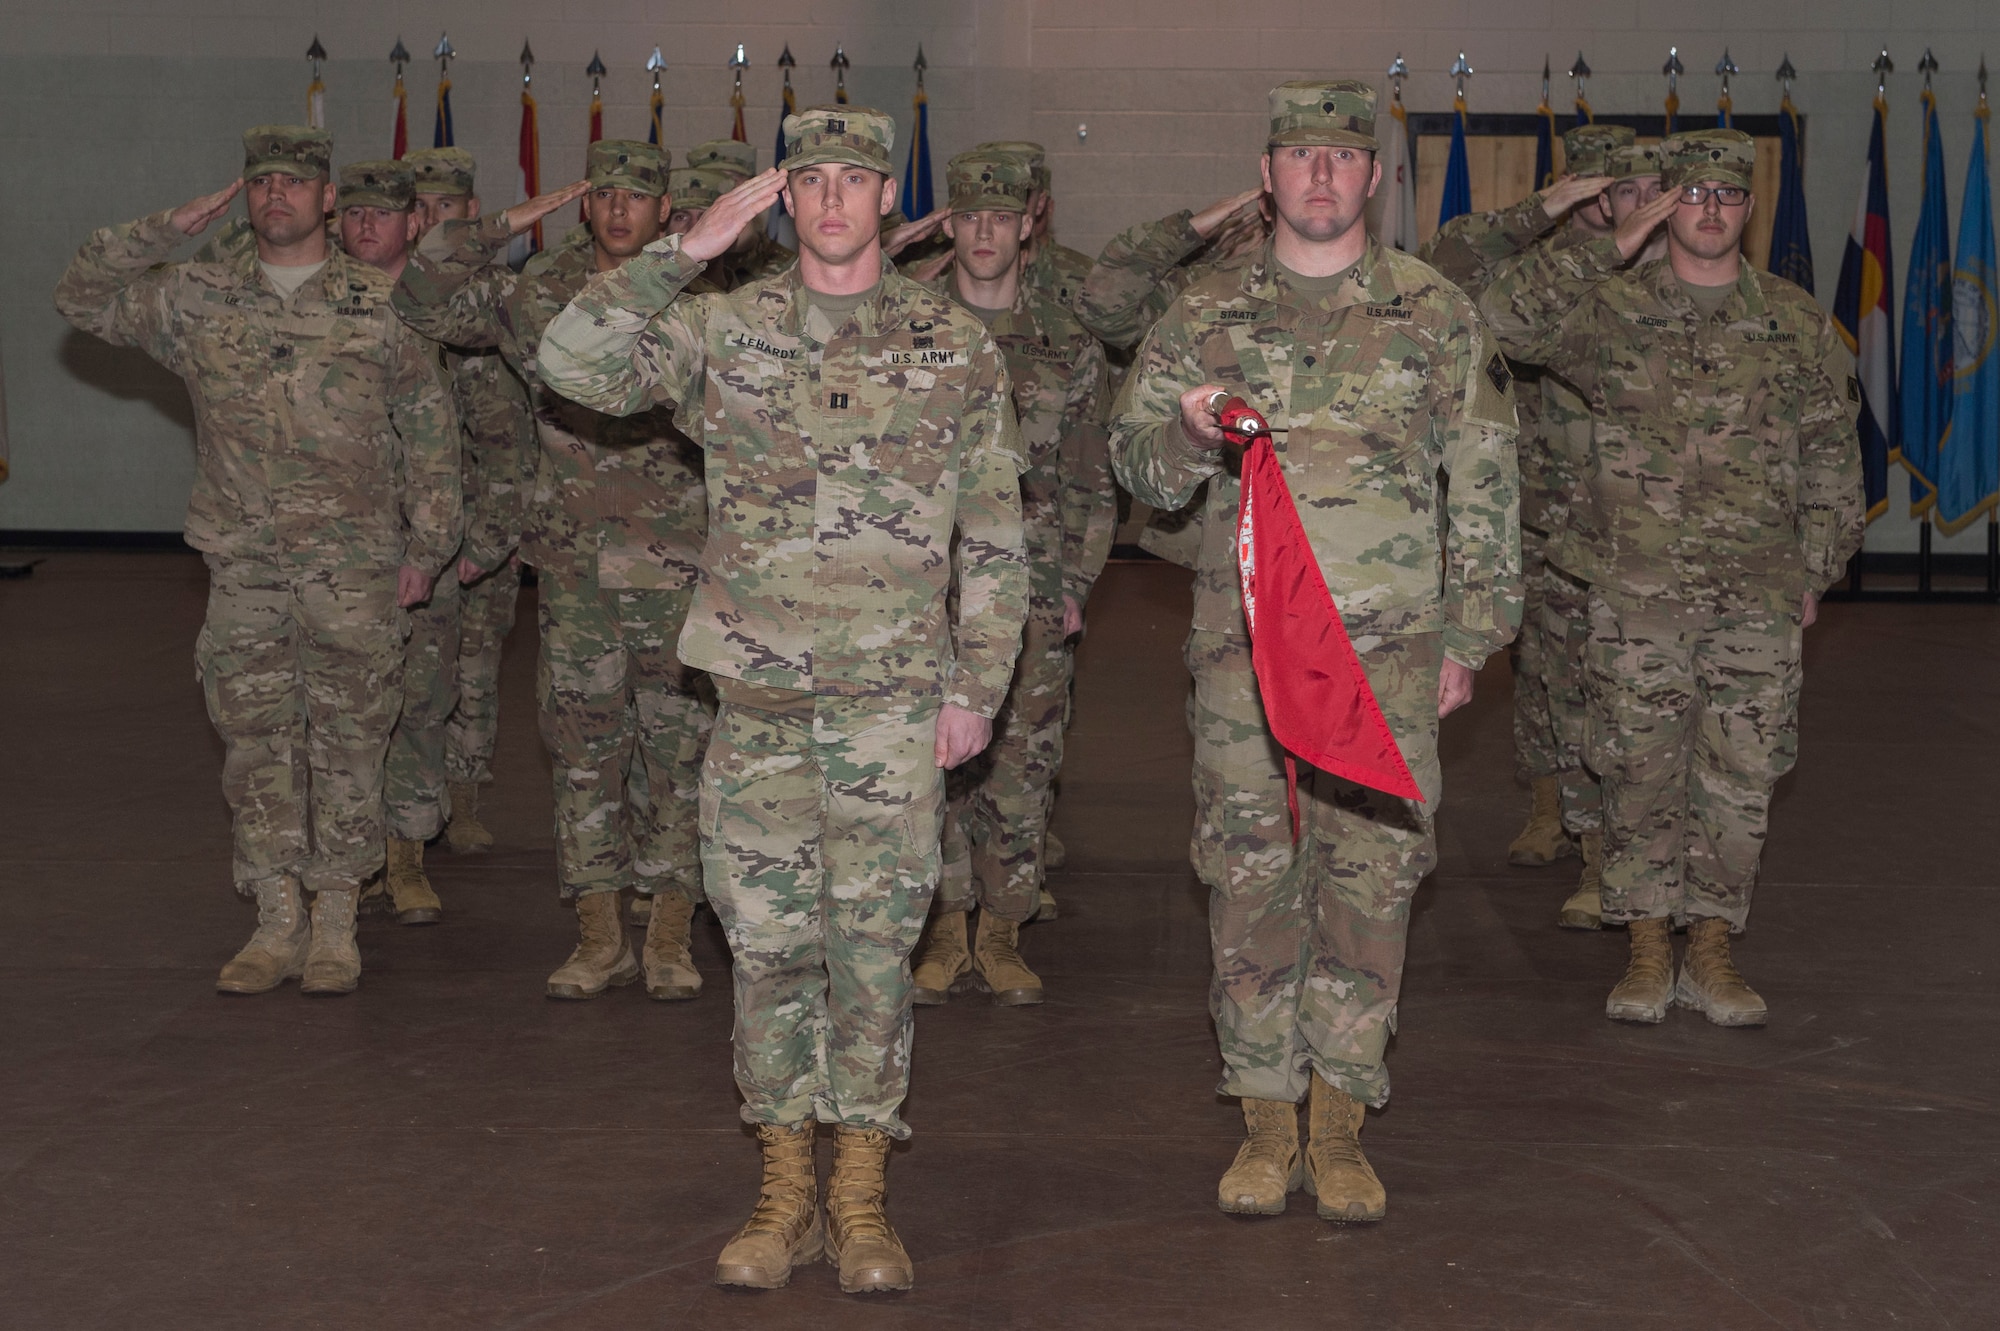 Members of the 74th Dive Detachment, 92nd Engineer Battalion, 20th Engineer Brigade salutes during a deployment ceremony at Joint Base Langley-Eustis, Va., Jan. 24, 2018. The 74th Dive Det. is planned to support Operation Spartan Shield by conducting dive operations to secure and maintain land-ready operational forces and hinder aggression in the region. (U.S. Air Force photo by Senior Airman Derek Seifert)